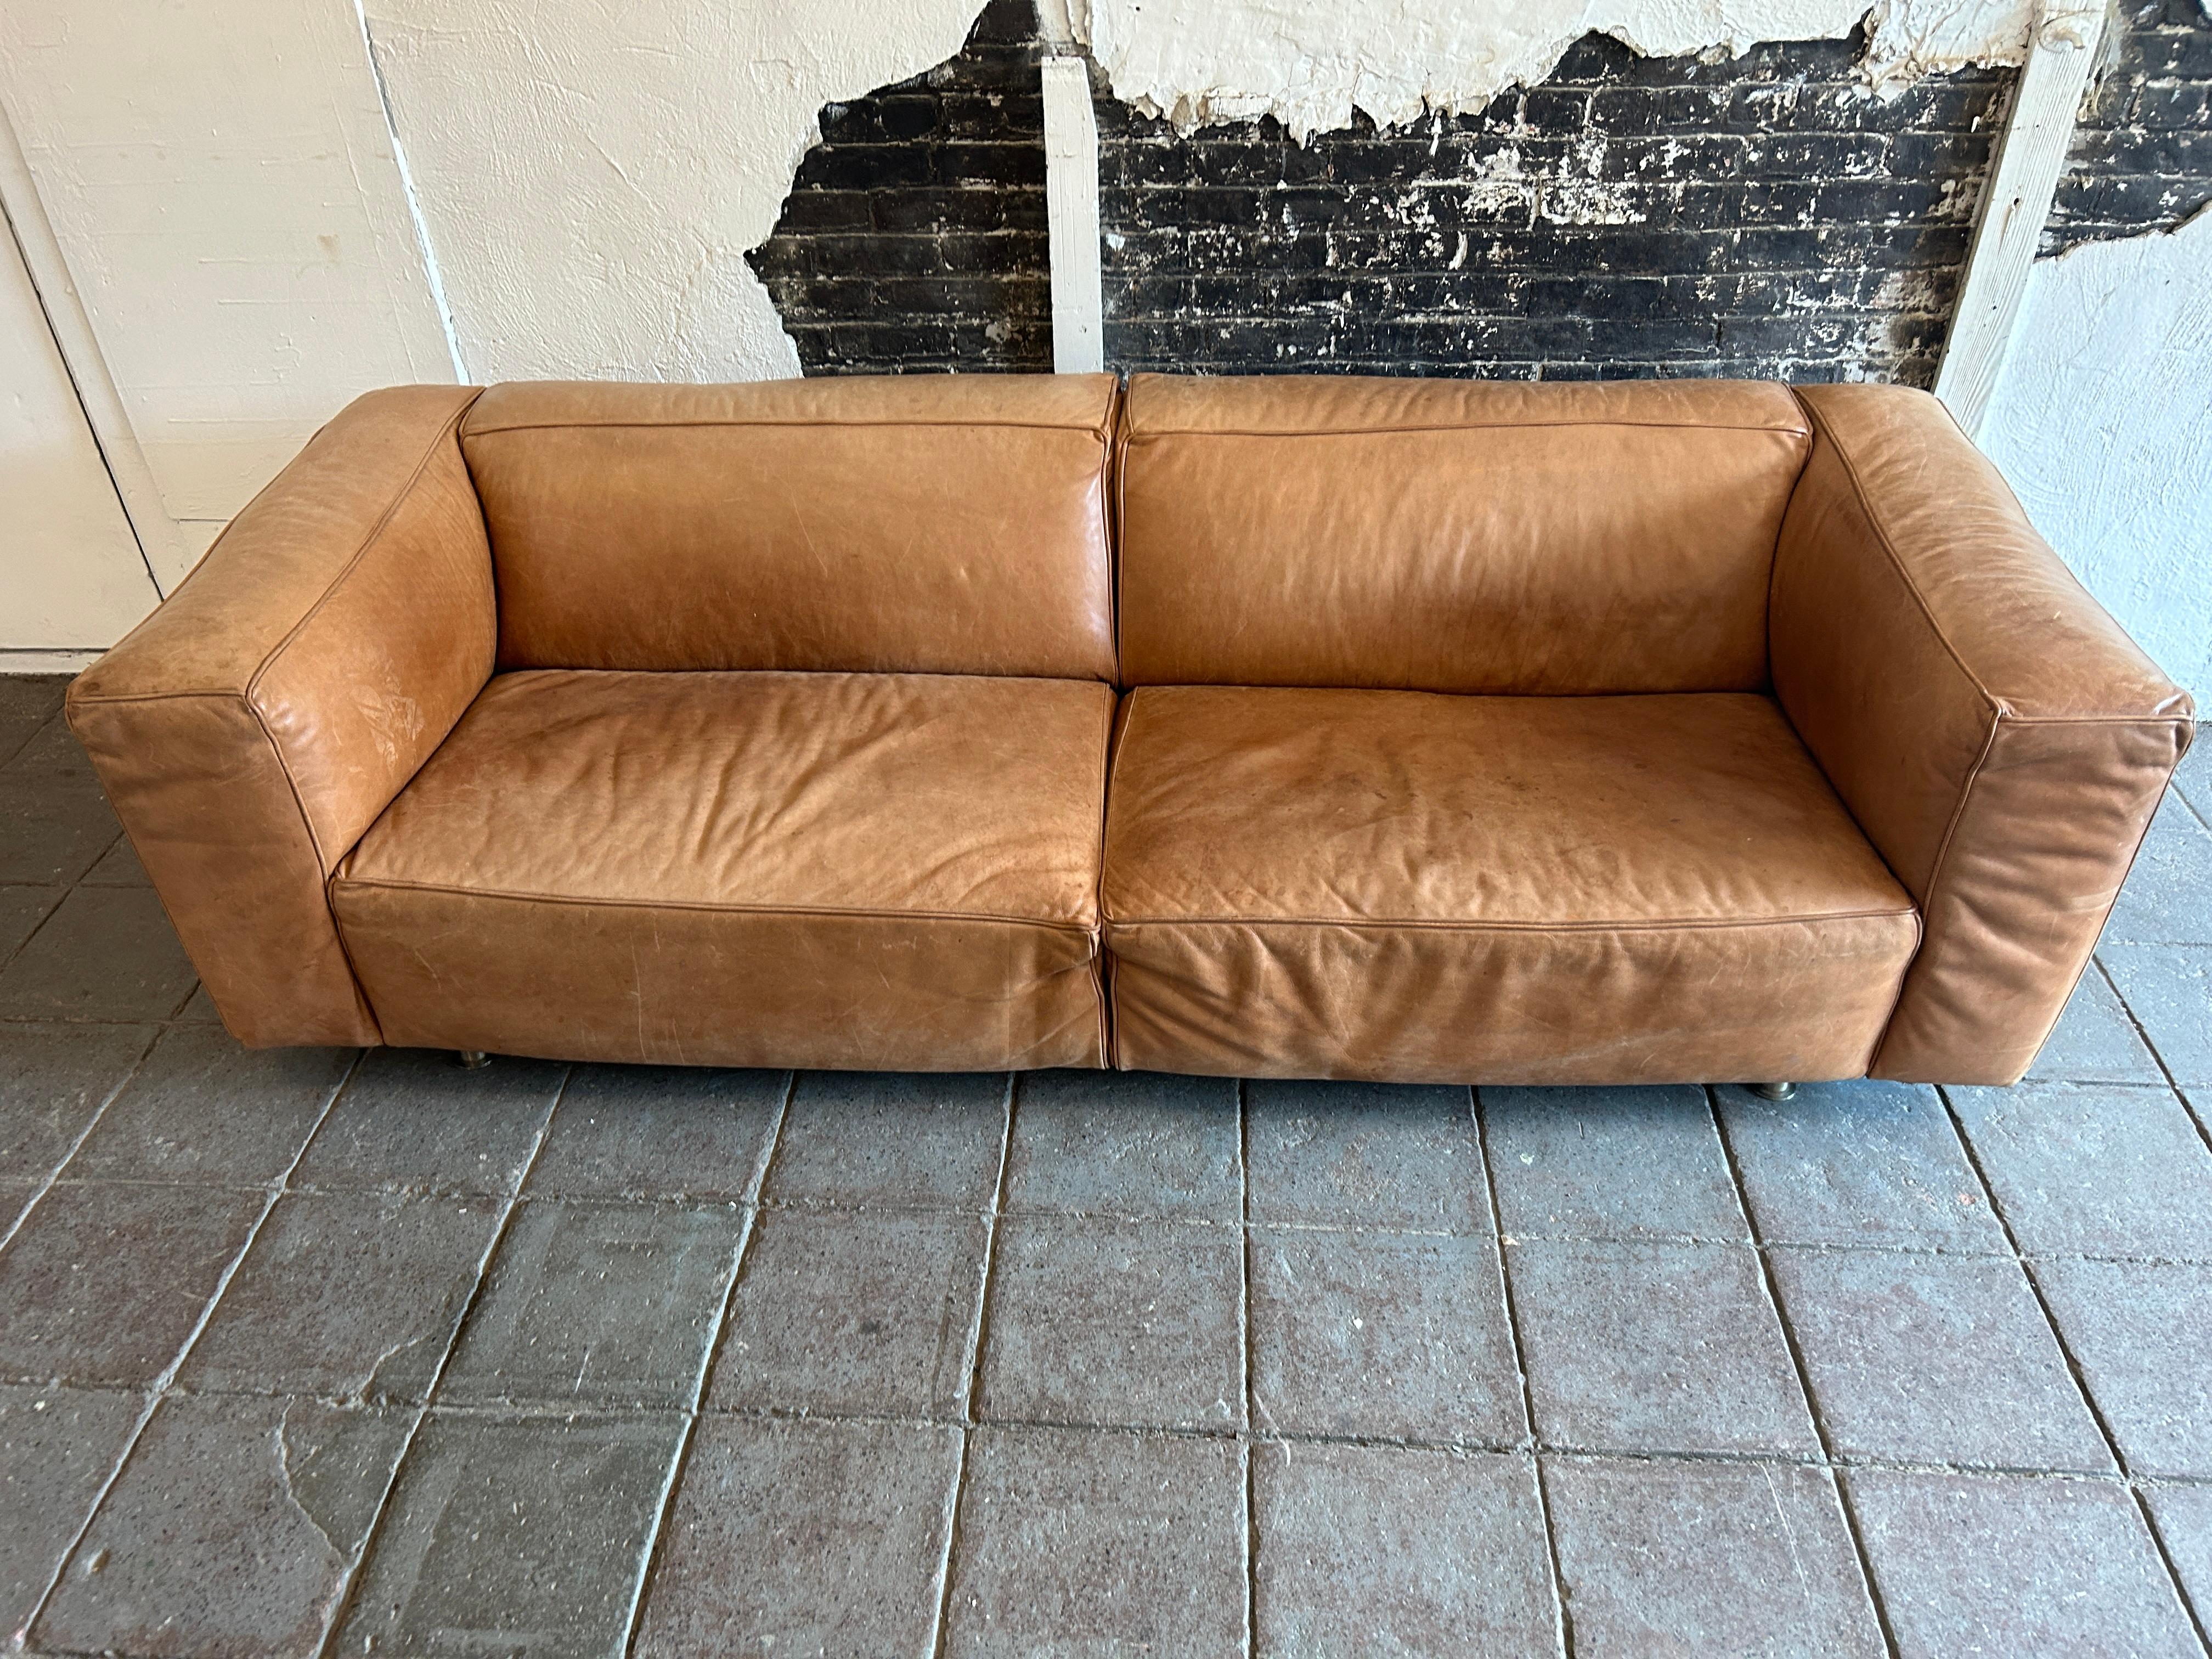 Modern tan Leather Sofa wide cube shaped very high quality leather and very heavy as well built very solid. Tan leather shows patina signs of use with a few small scuffs. Very well broken in and leather shows normal fading from use. You will love